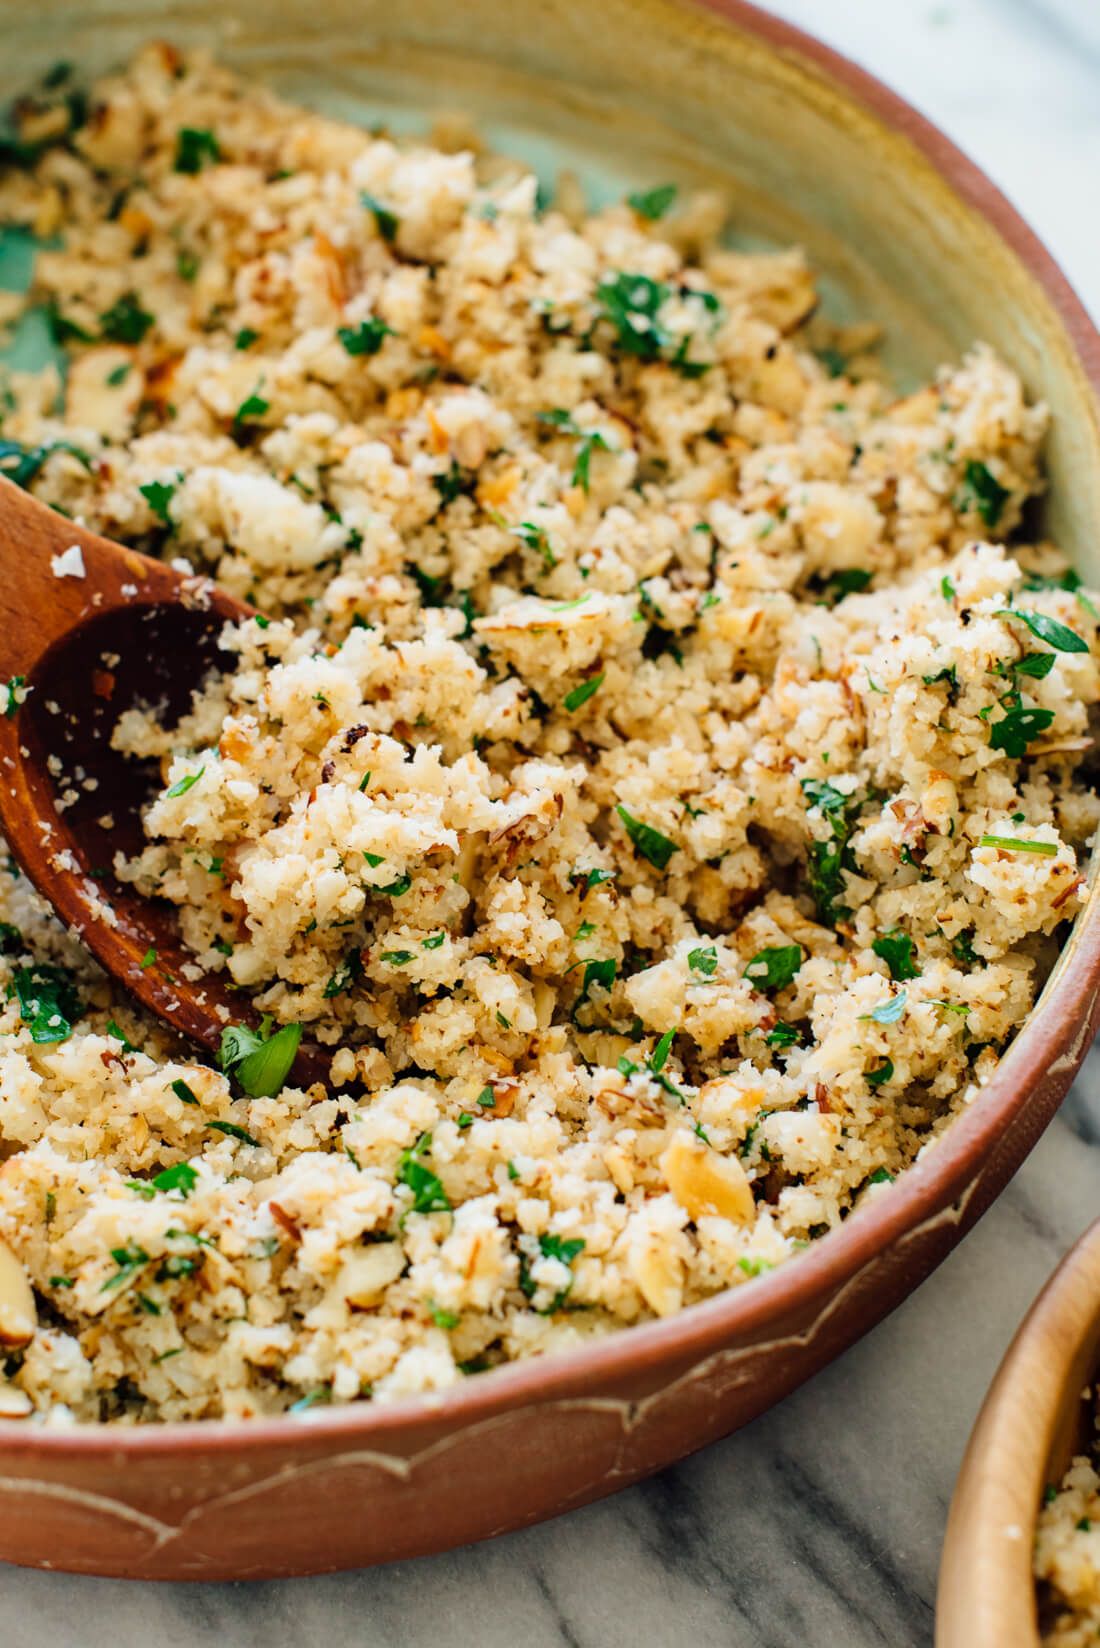 How Long To Cook Cauliflower Rice